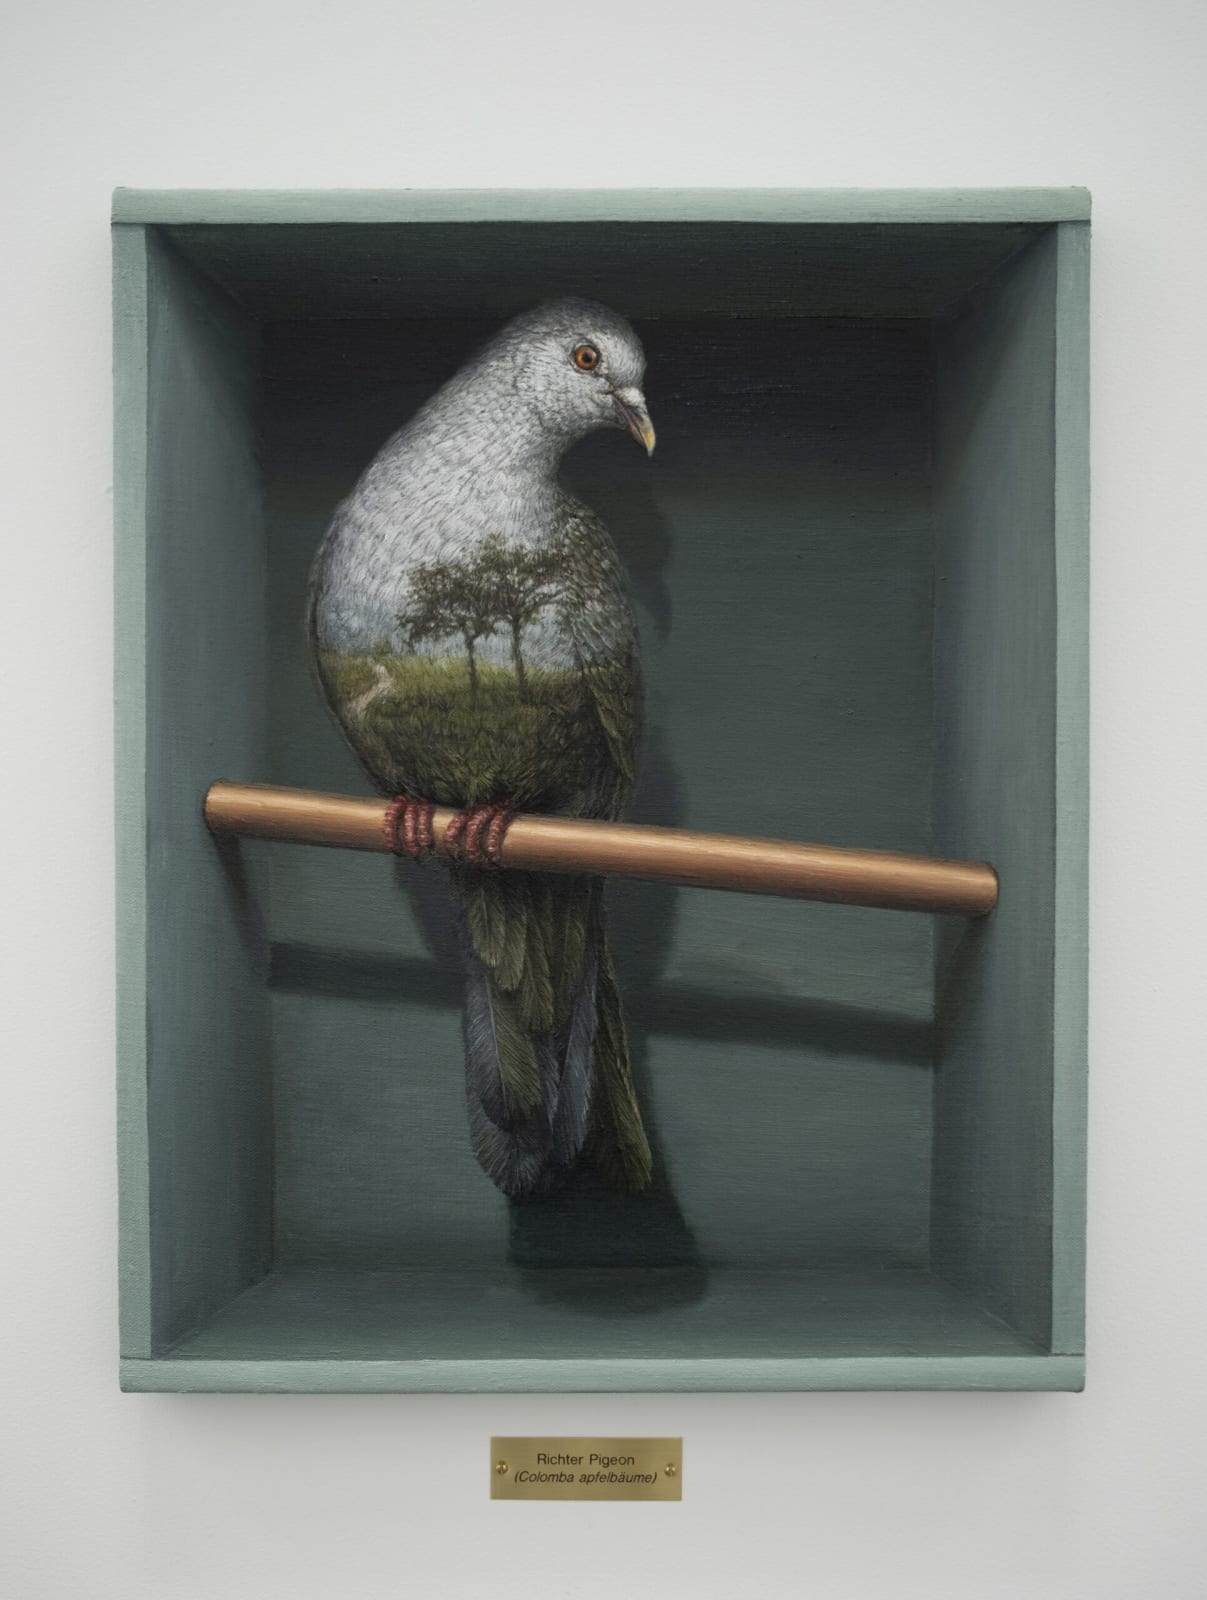 Clive Smith, Richter Pigeon (Colomba apfelbäume), 2022